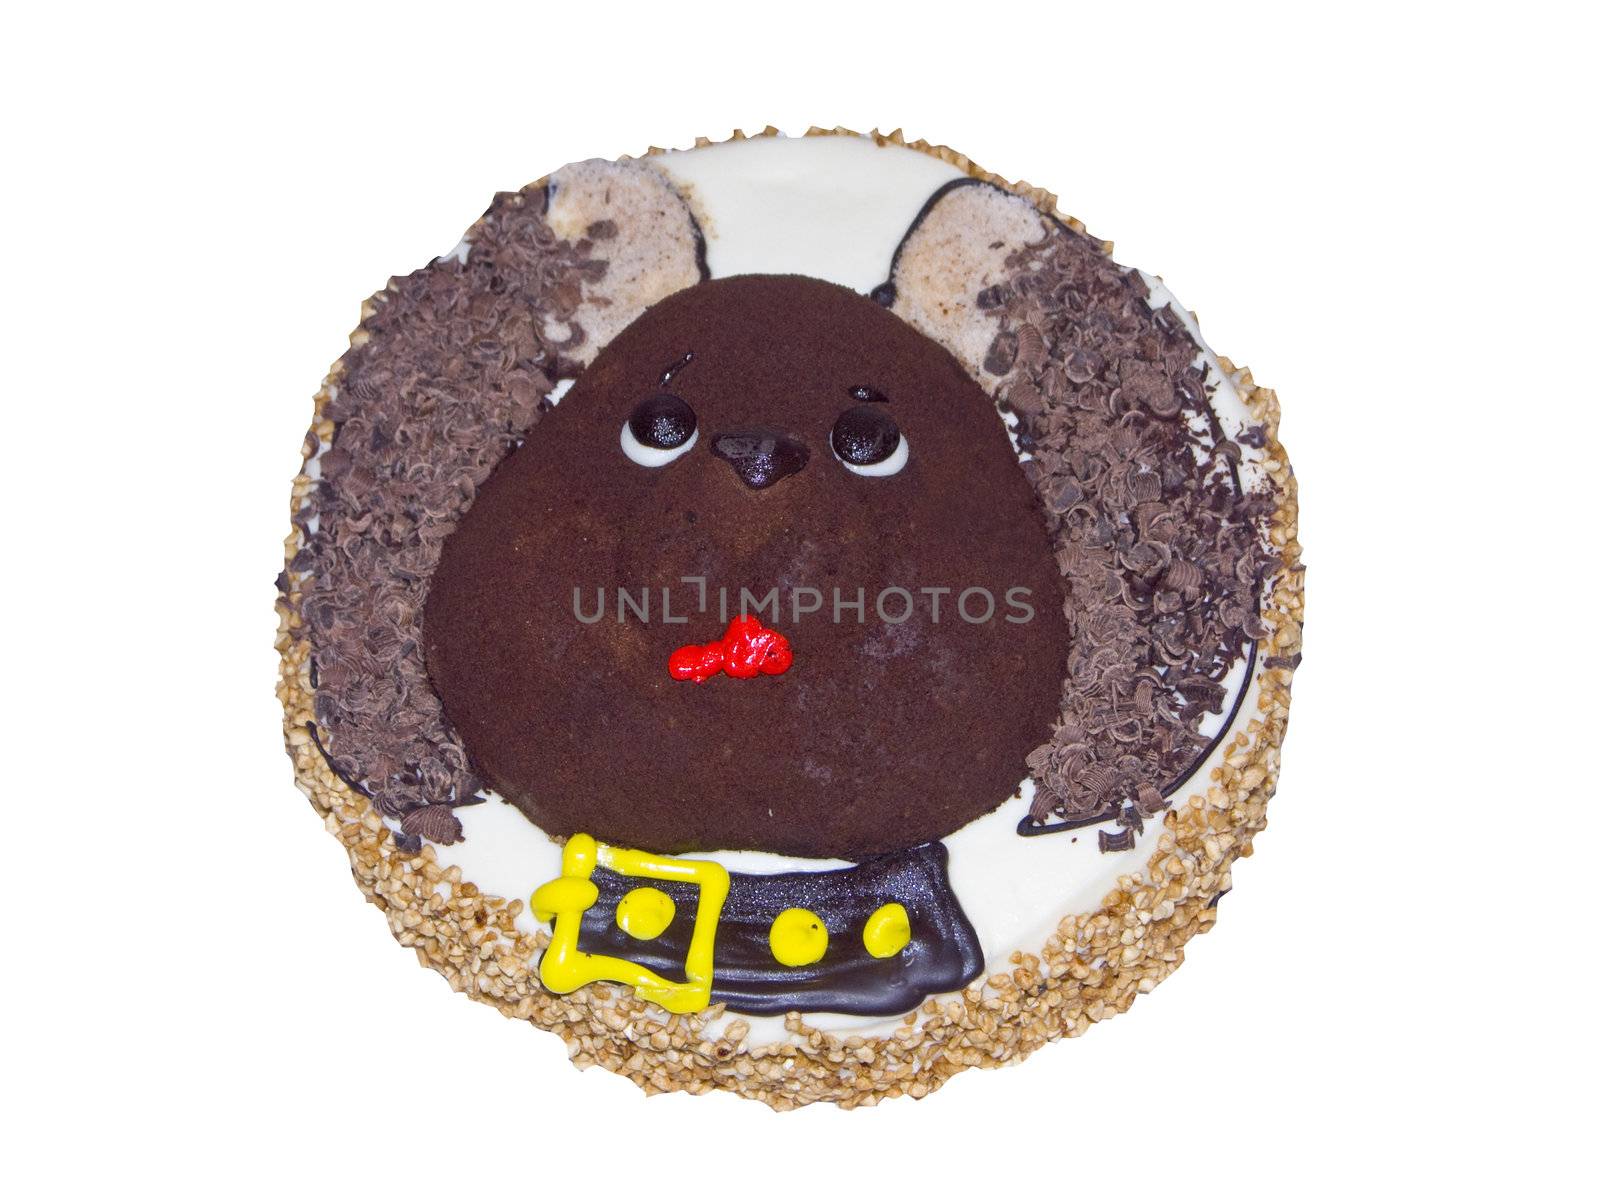 The image of a chocolate pie for a children's holiday